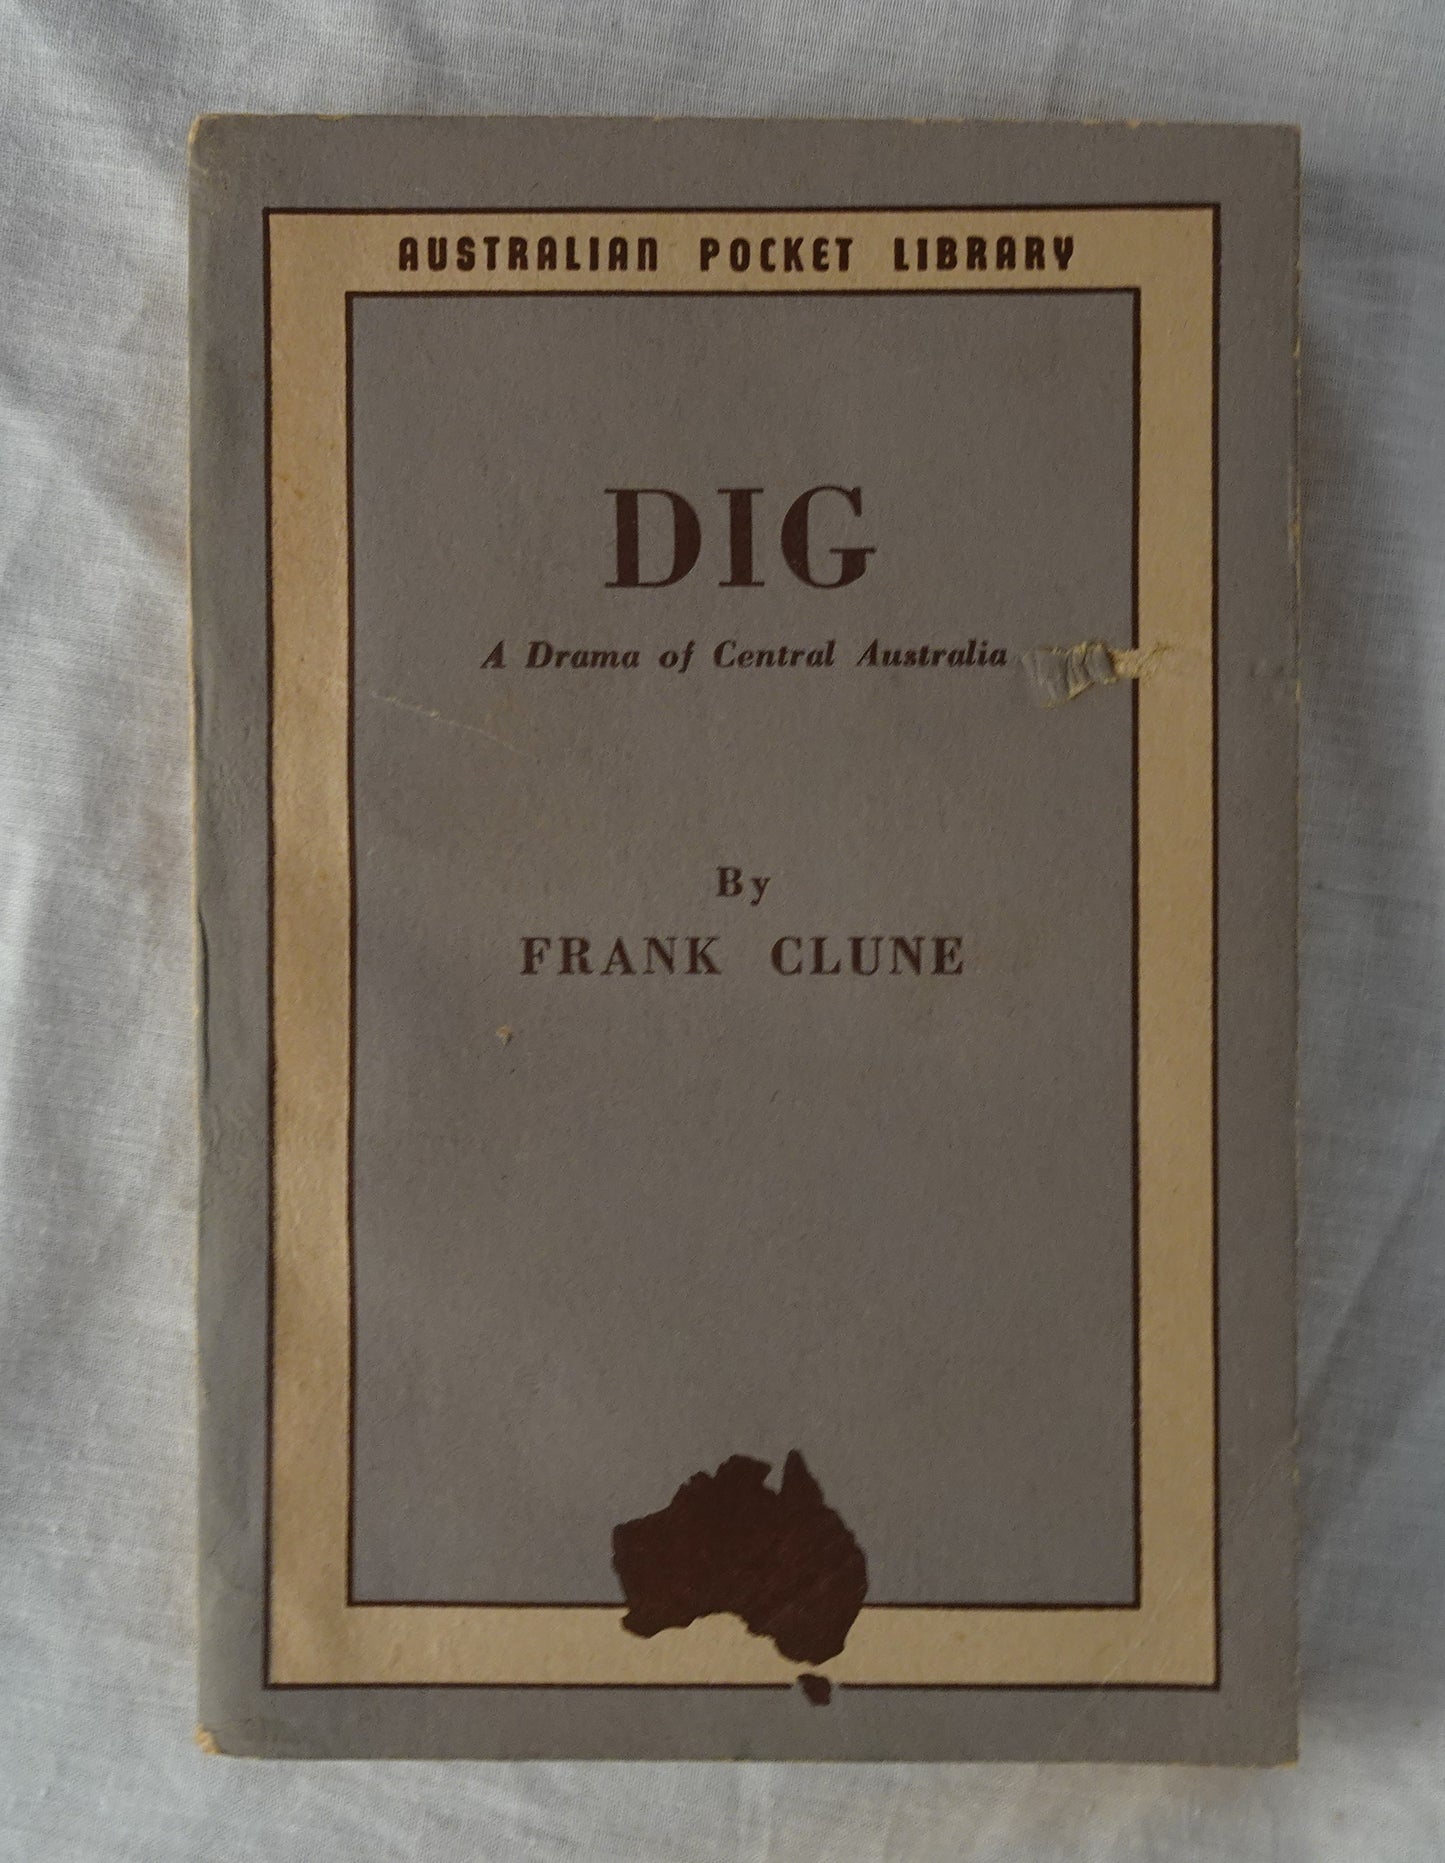 Dig  A Drama of Central Australia  by Frank Clune  (Australian Pocket Library)